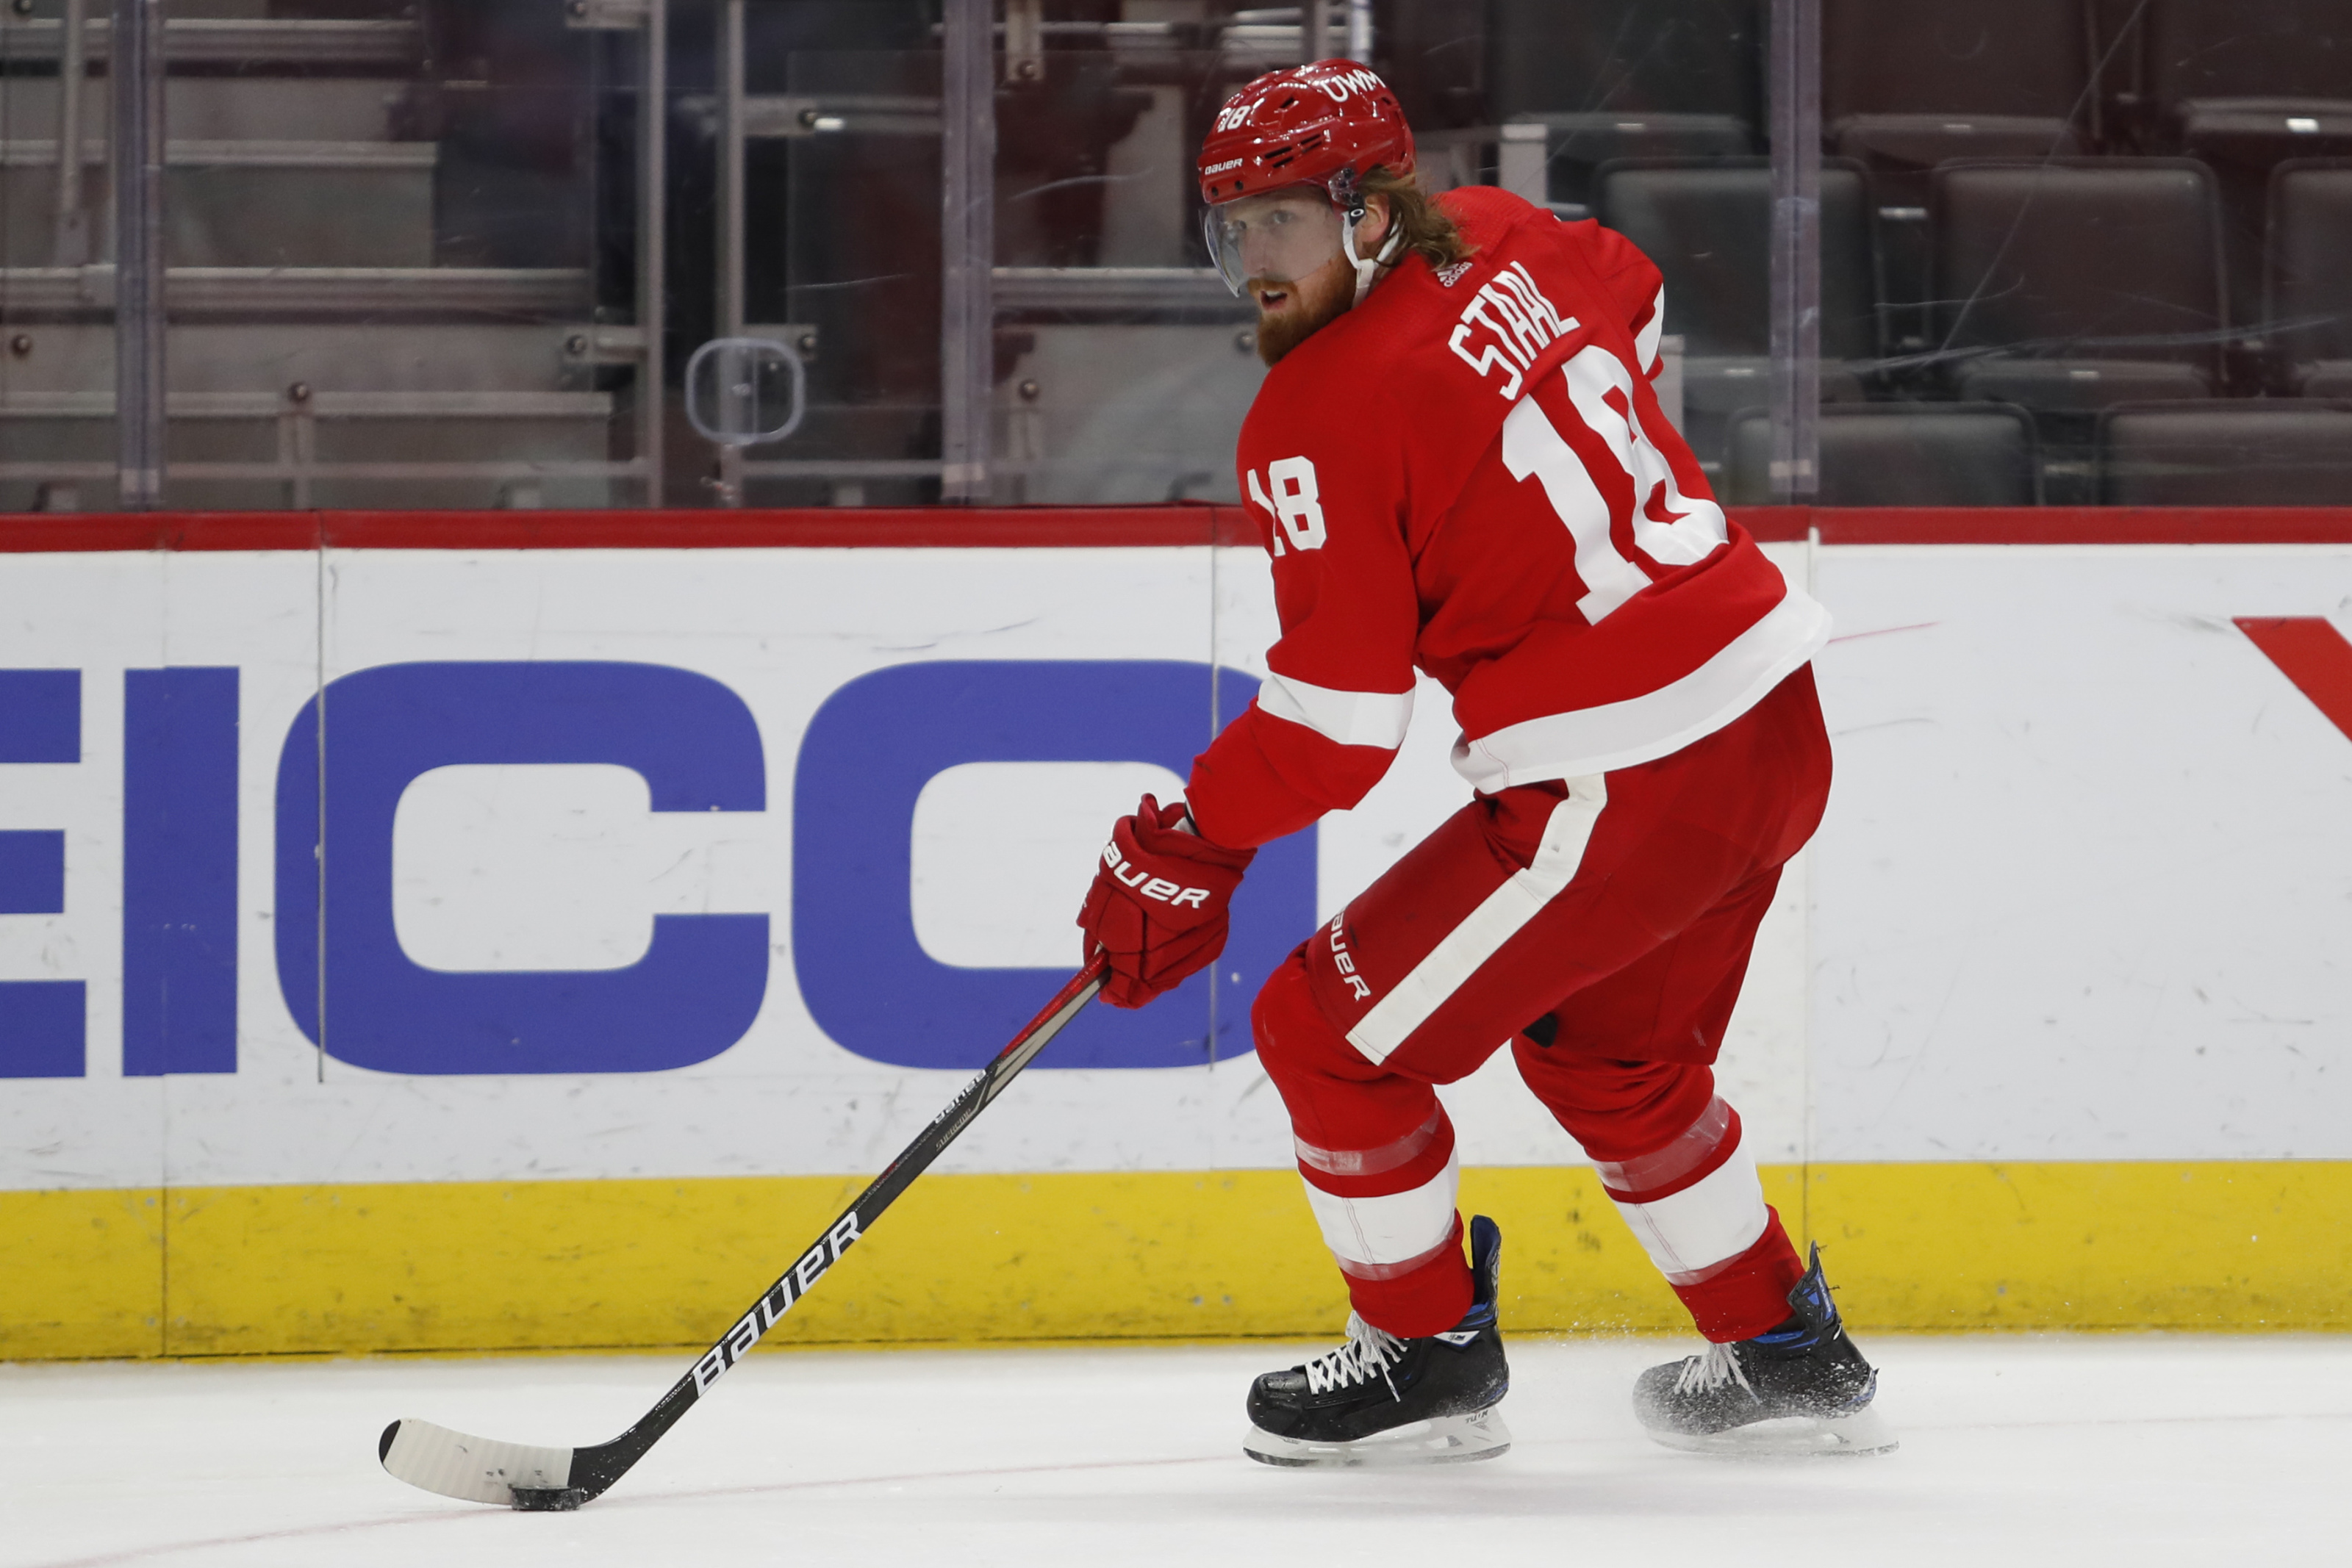 Excited to be back': Marc Staal jumped at chance to rejoin Detroit